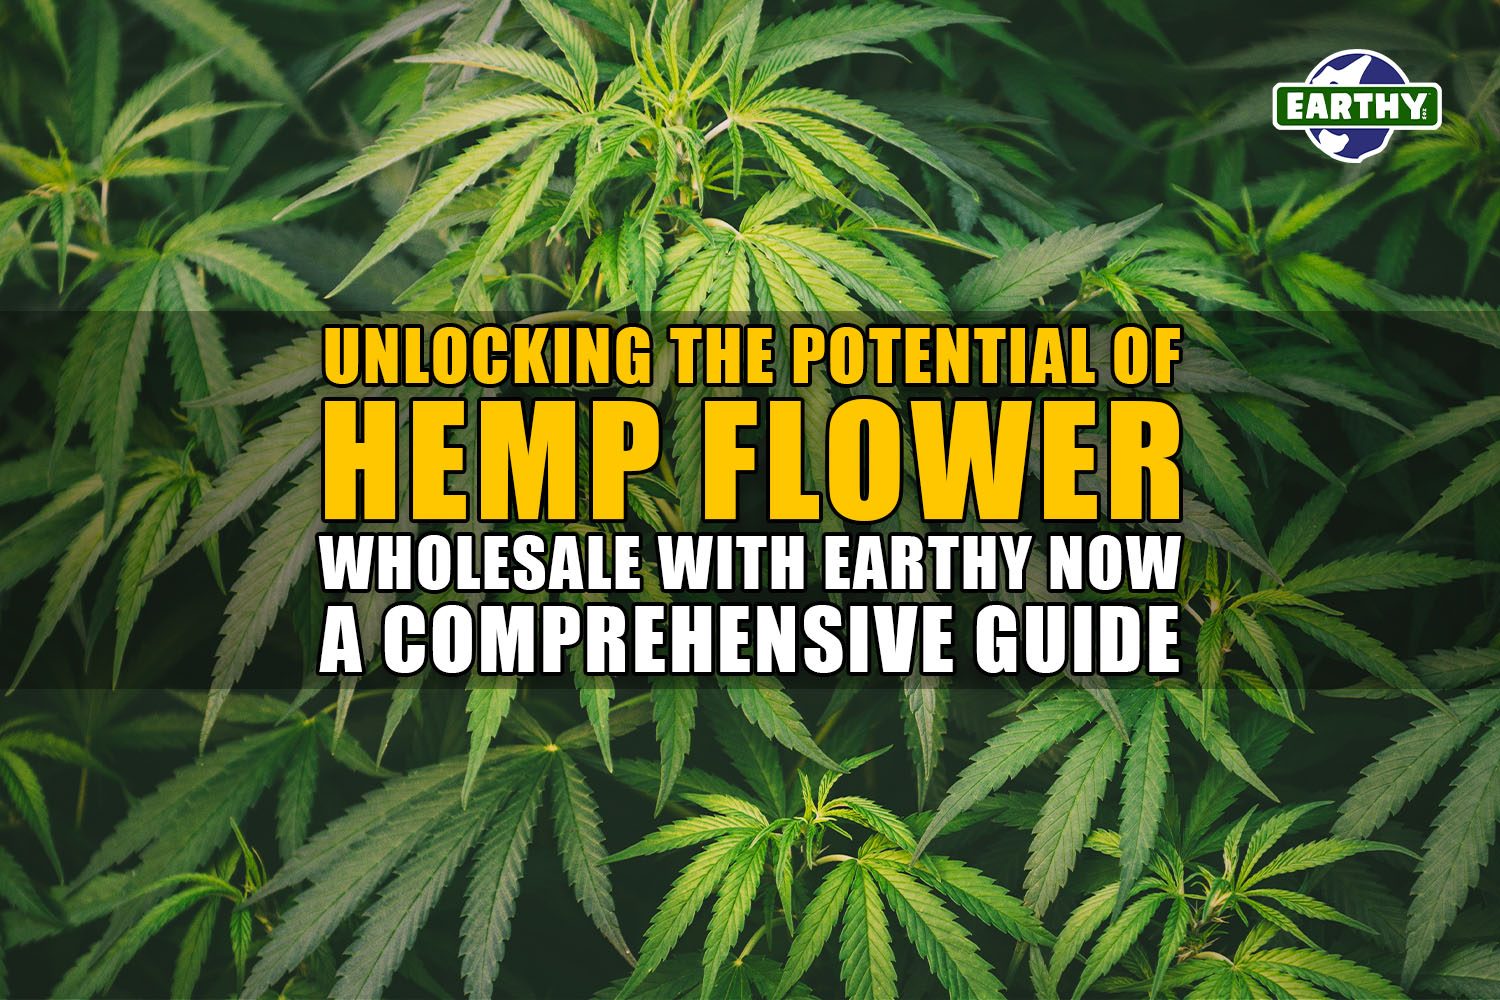 Unlocking the Potential of Hemp Flower Wholesale with Earthy Now: A Comprehensive Guide